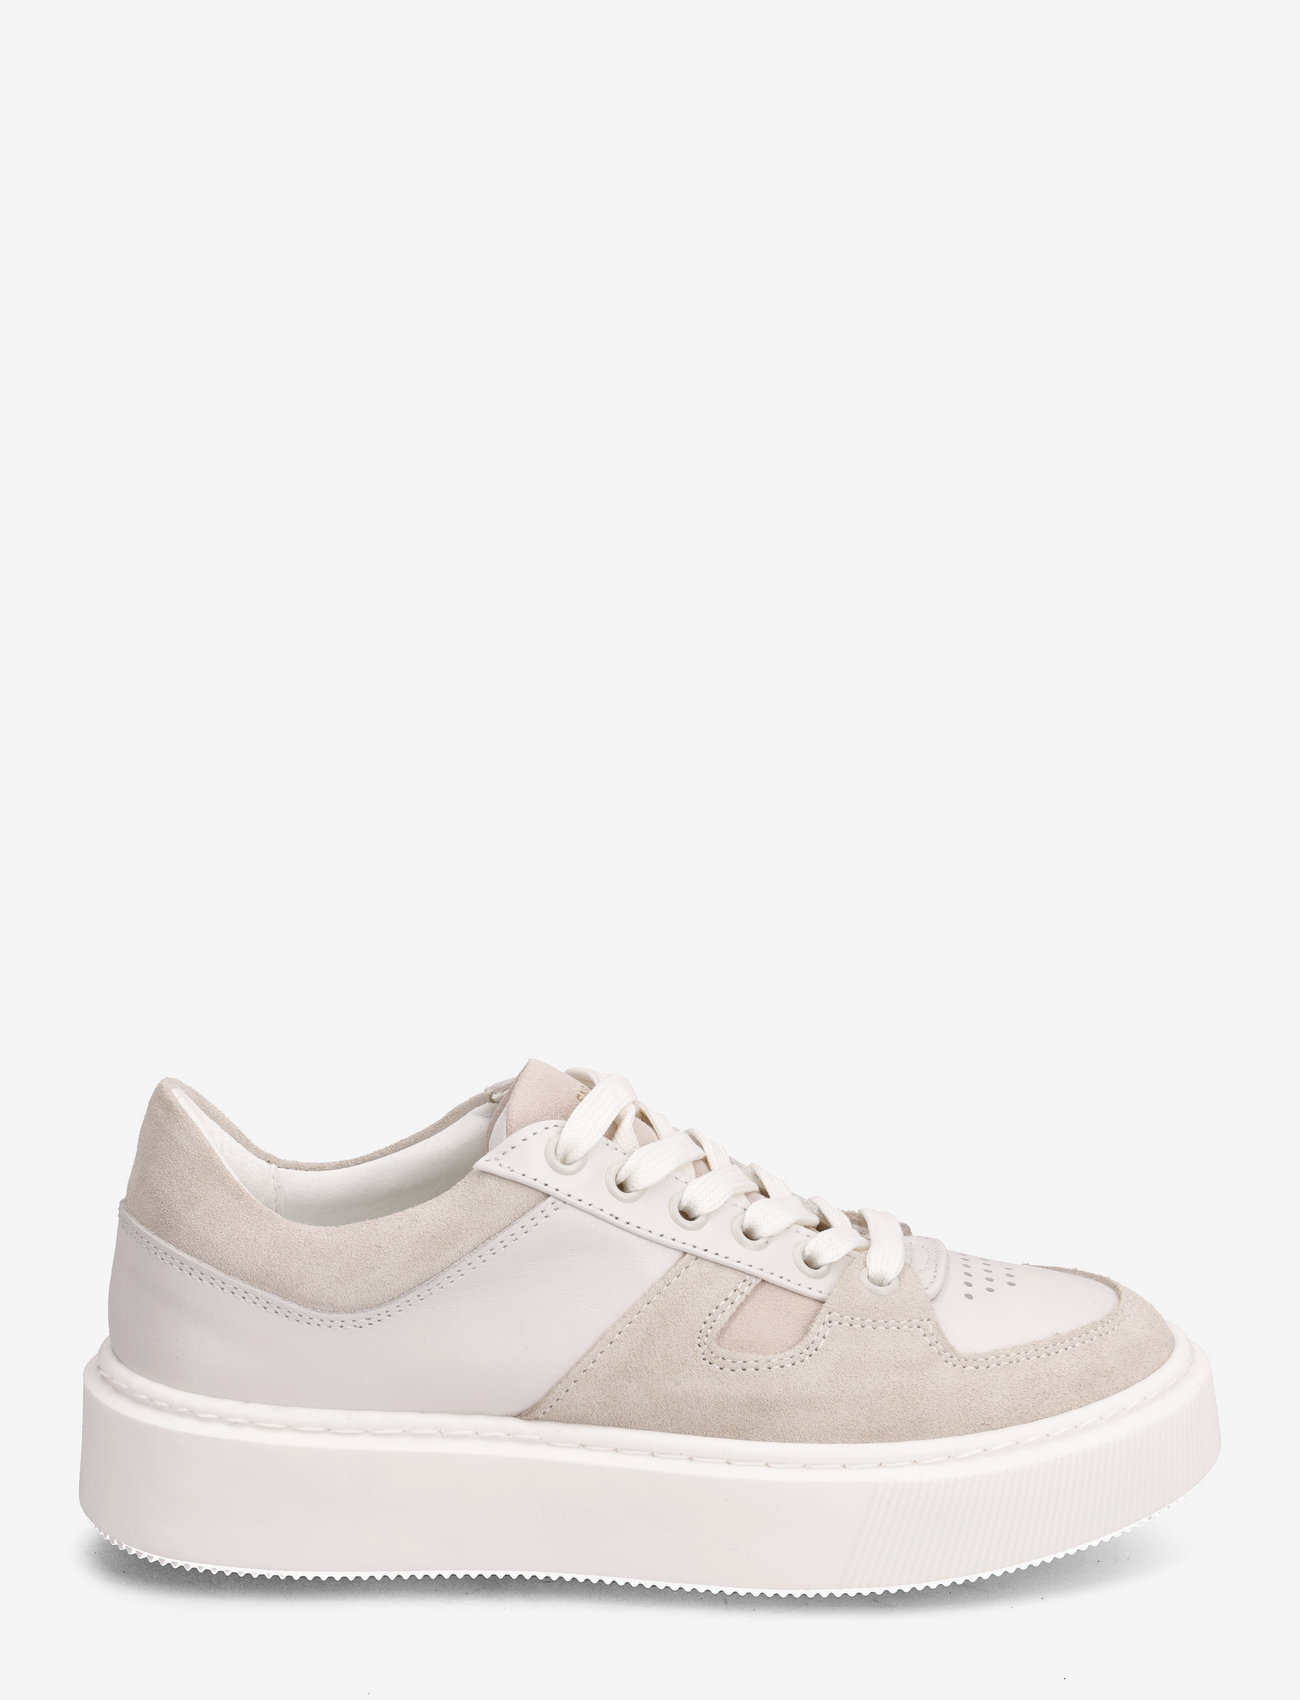 Sneaky Steve - Away W Leather Shoe - low top sneakers - creme/pink - 1